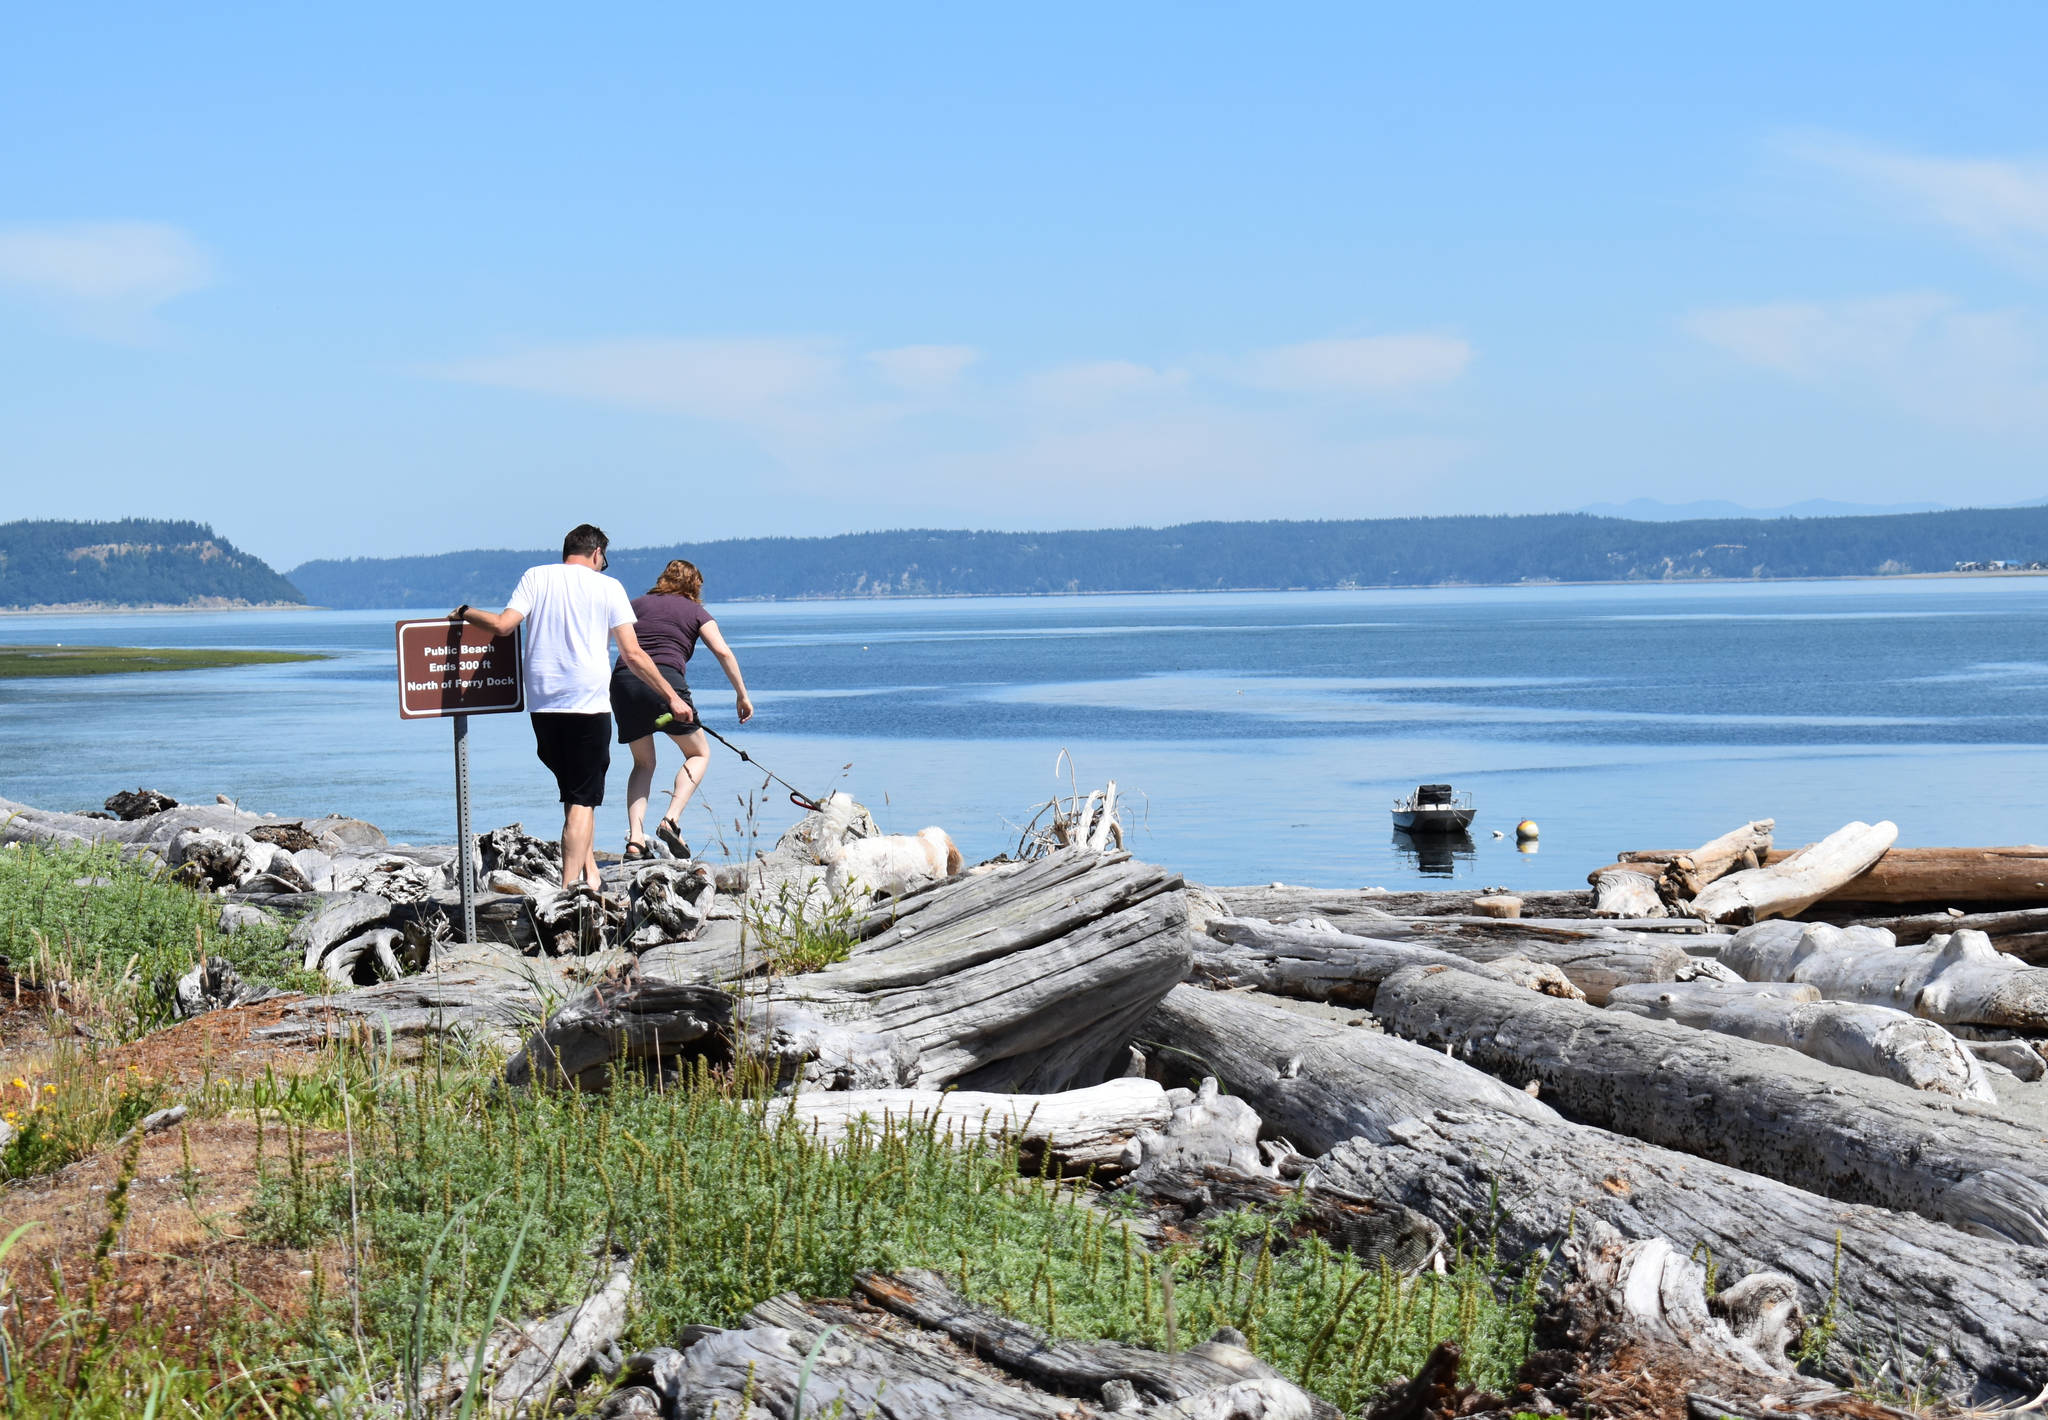 Photo by Emily Gilbert/South Whidbey Record
A couple and their dog climb over the driftwood at Clinton Beach that has piled up after winter storms.